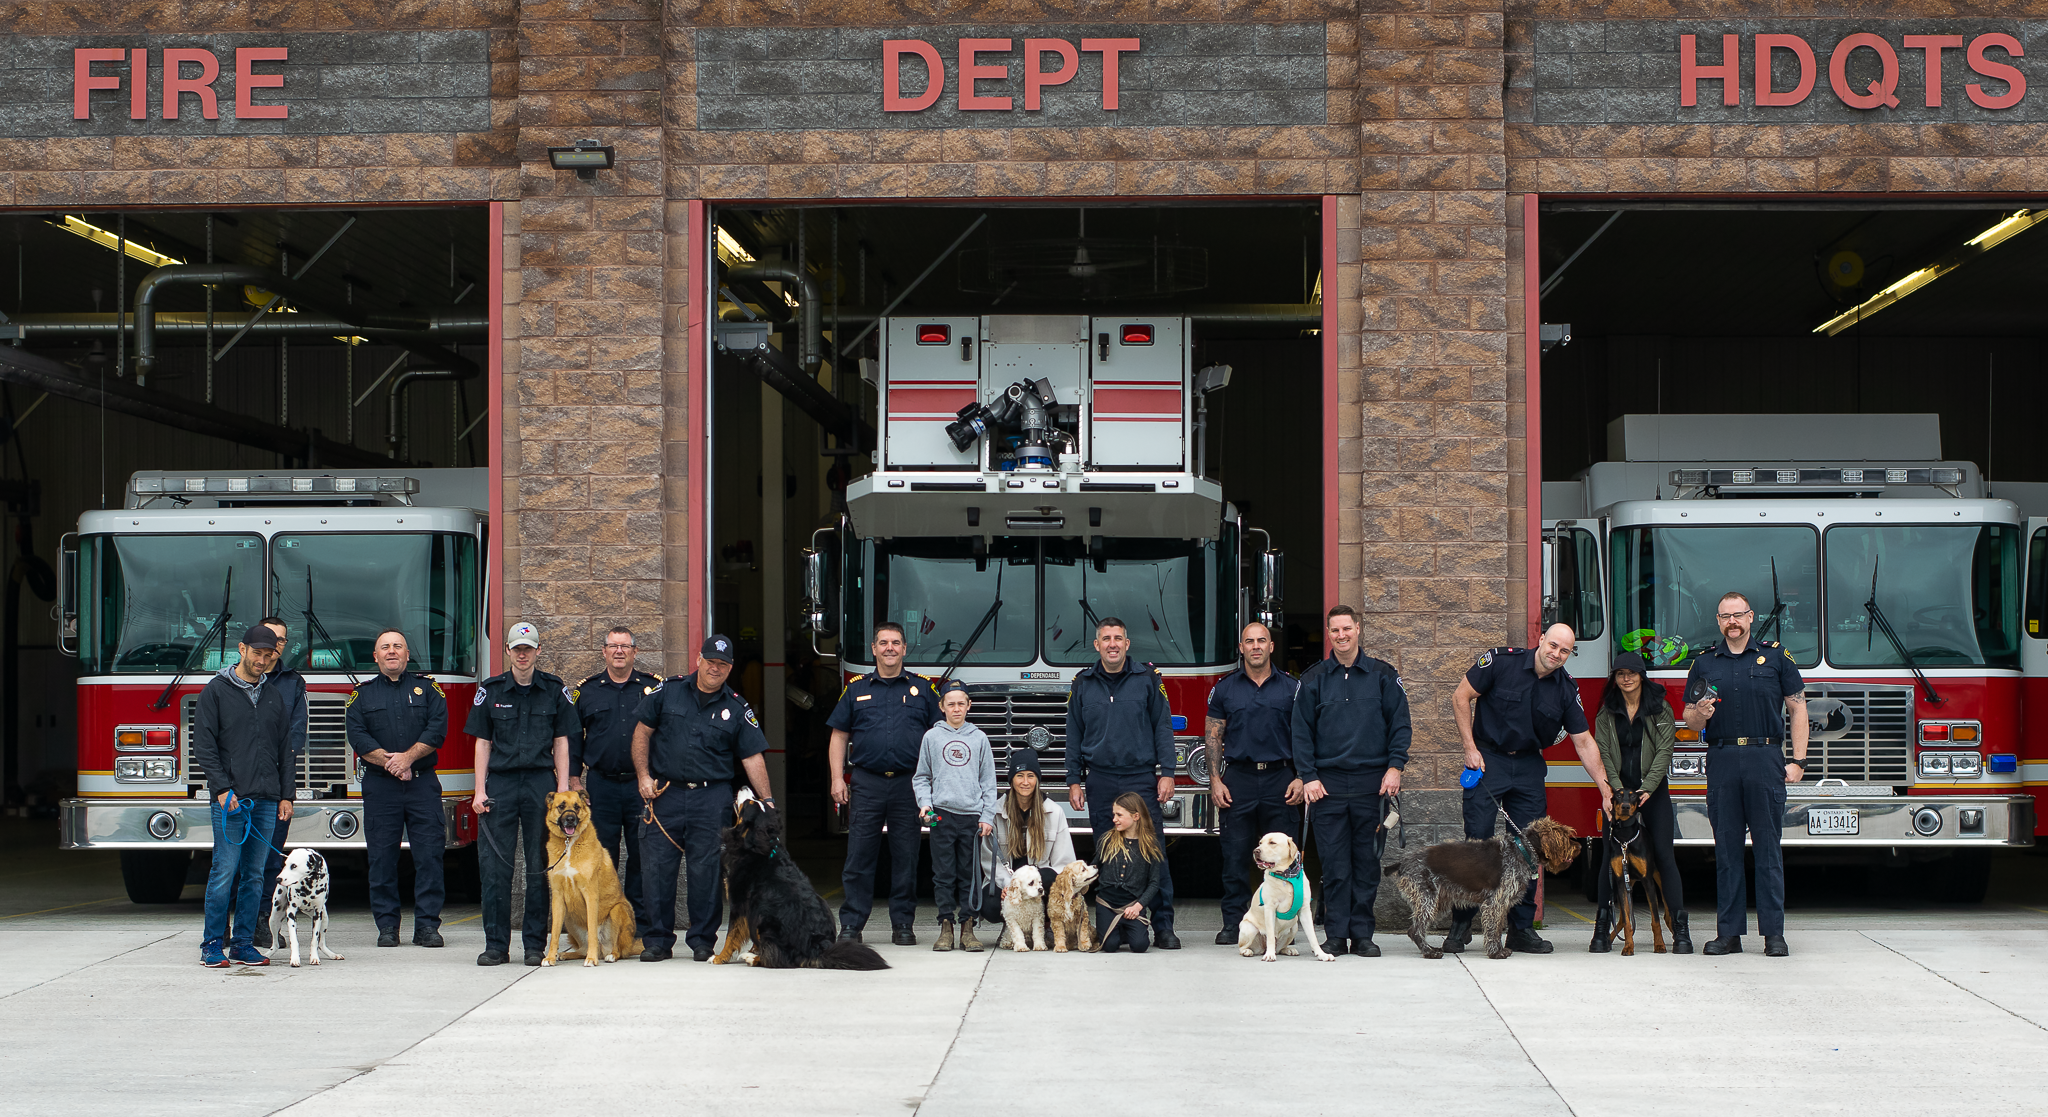 Group of people standing infront of fire station with dogs